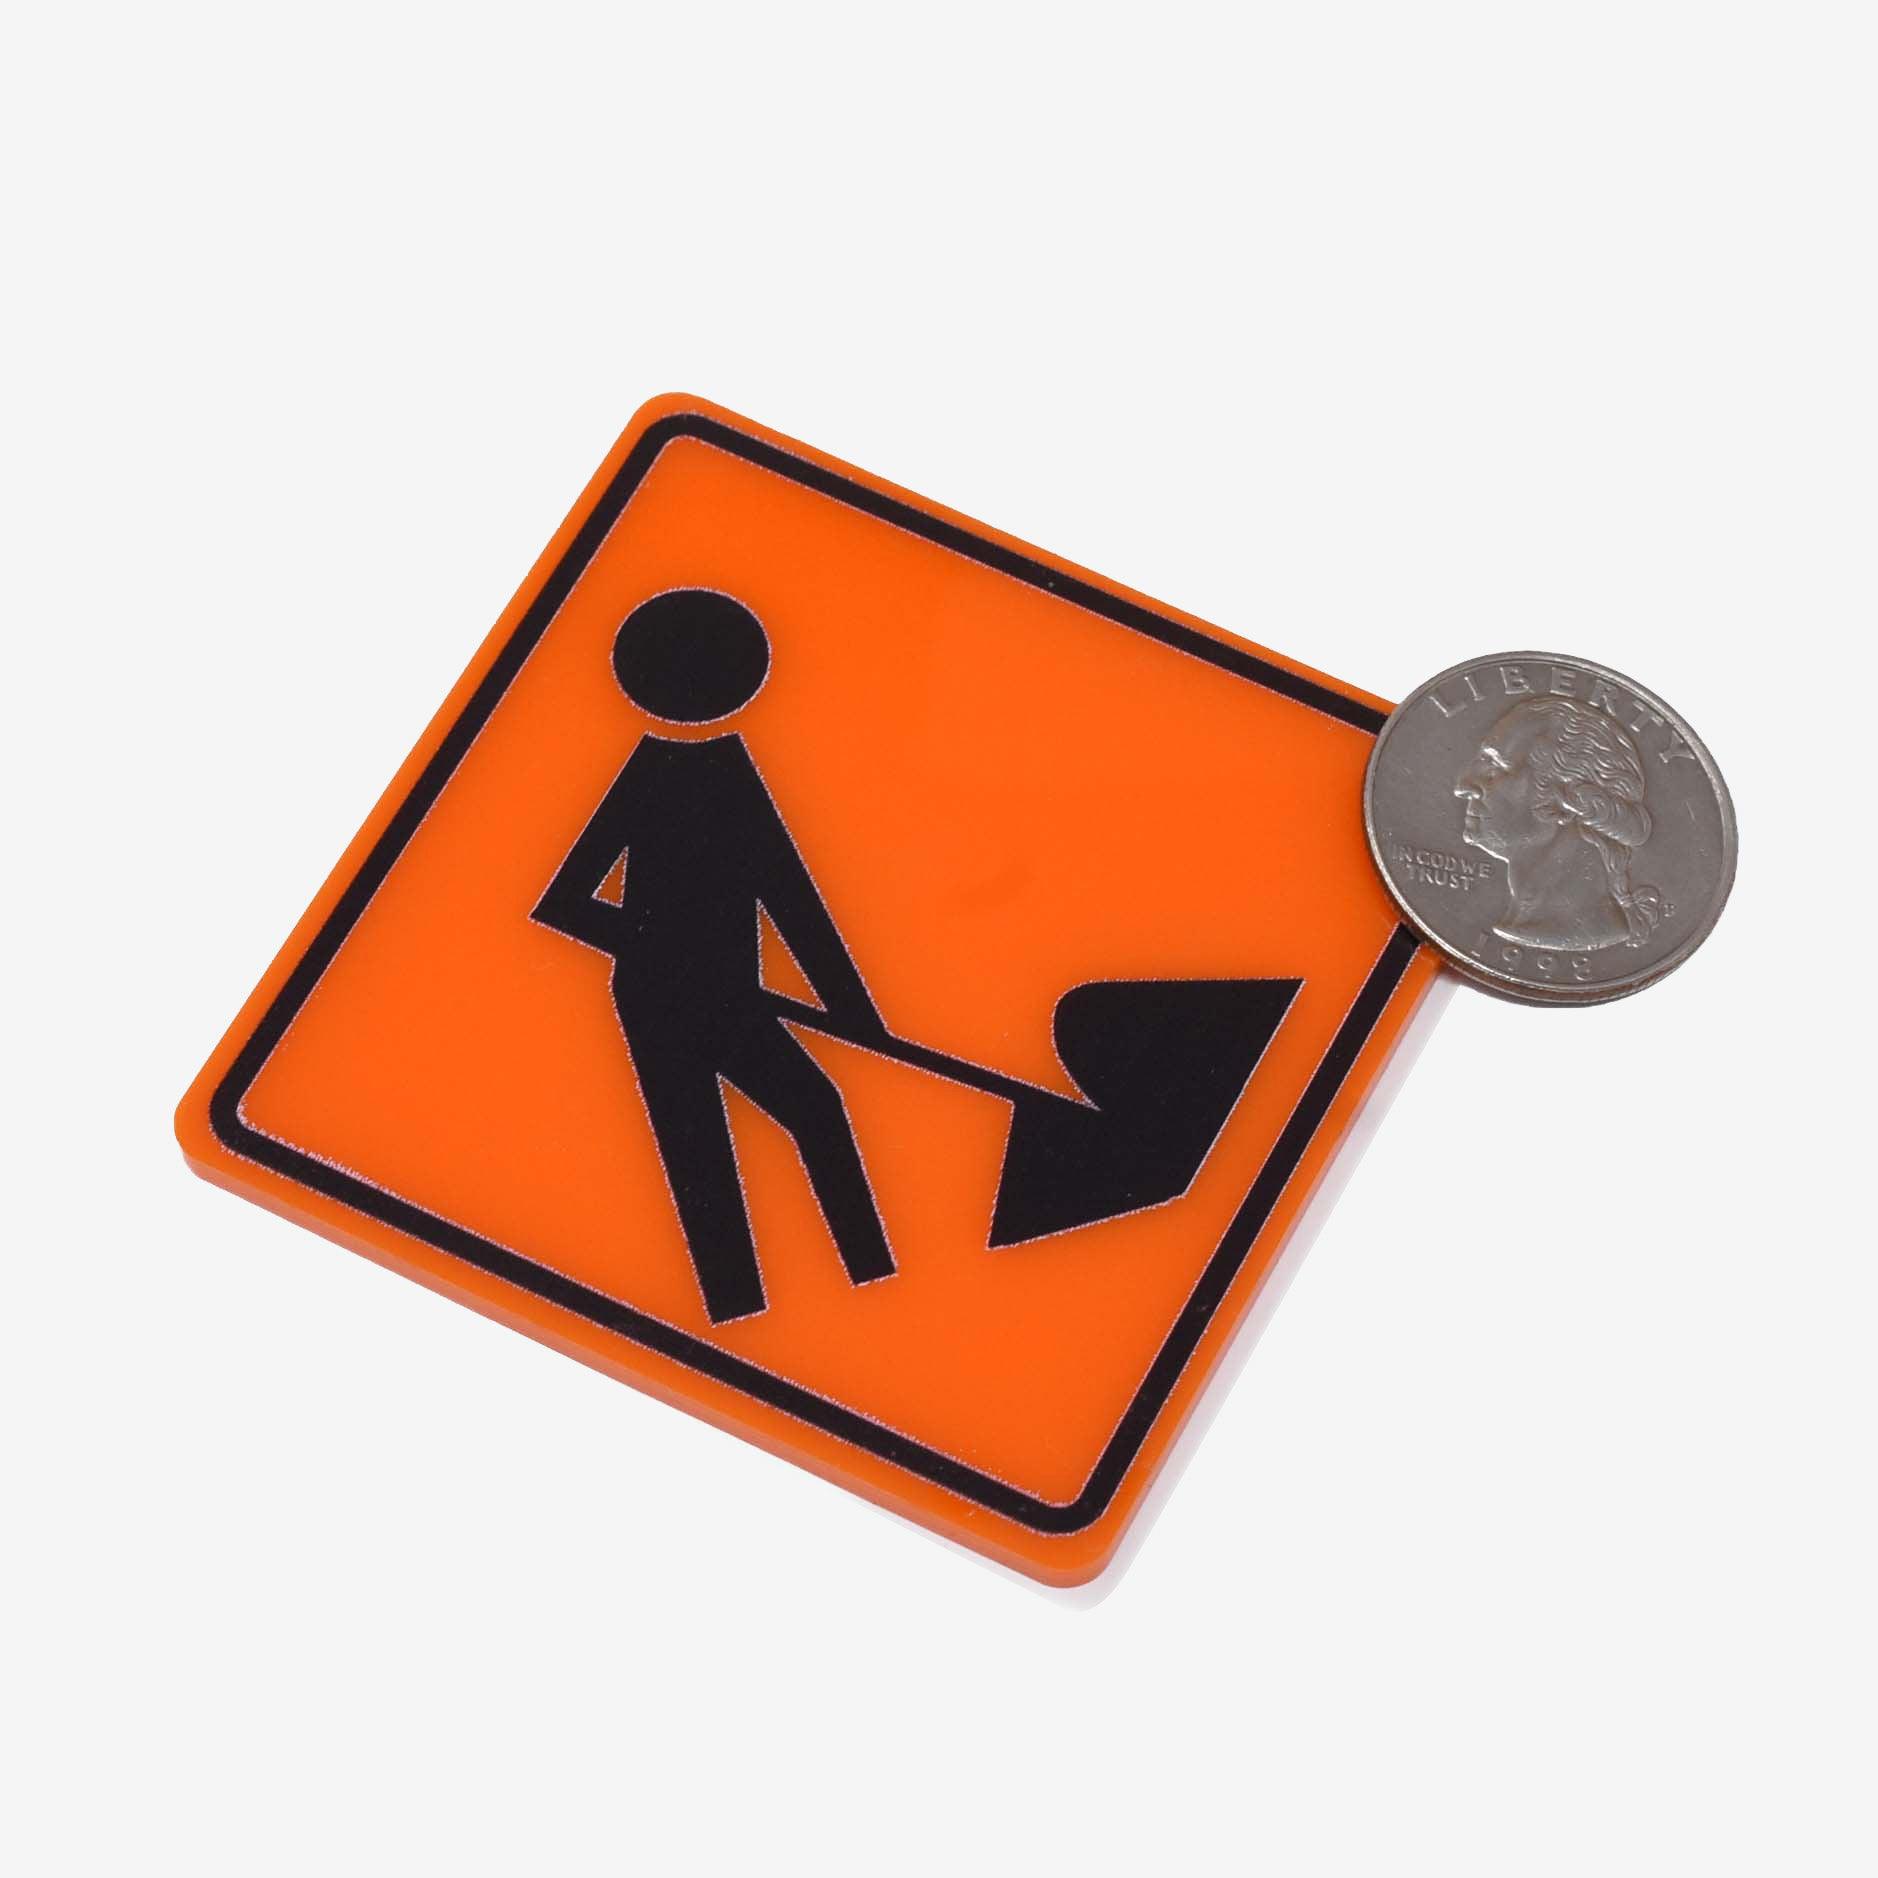 construction road sign